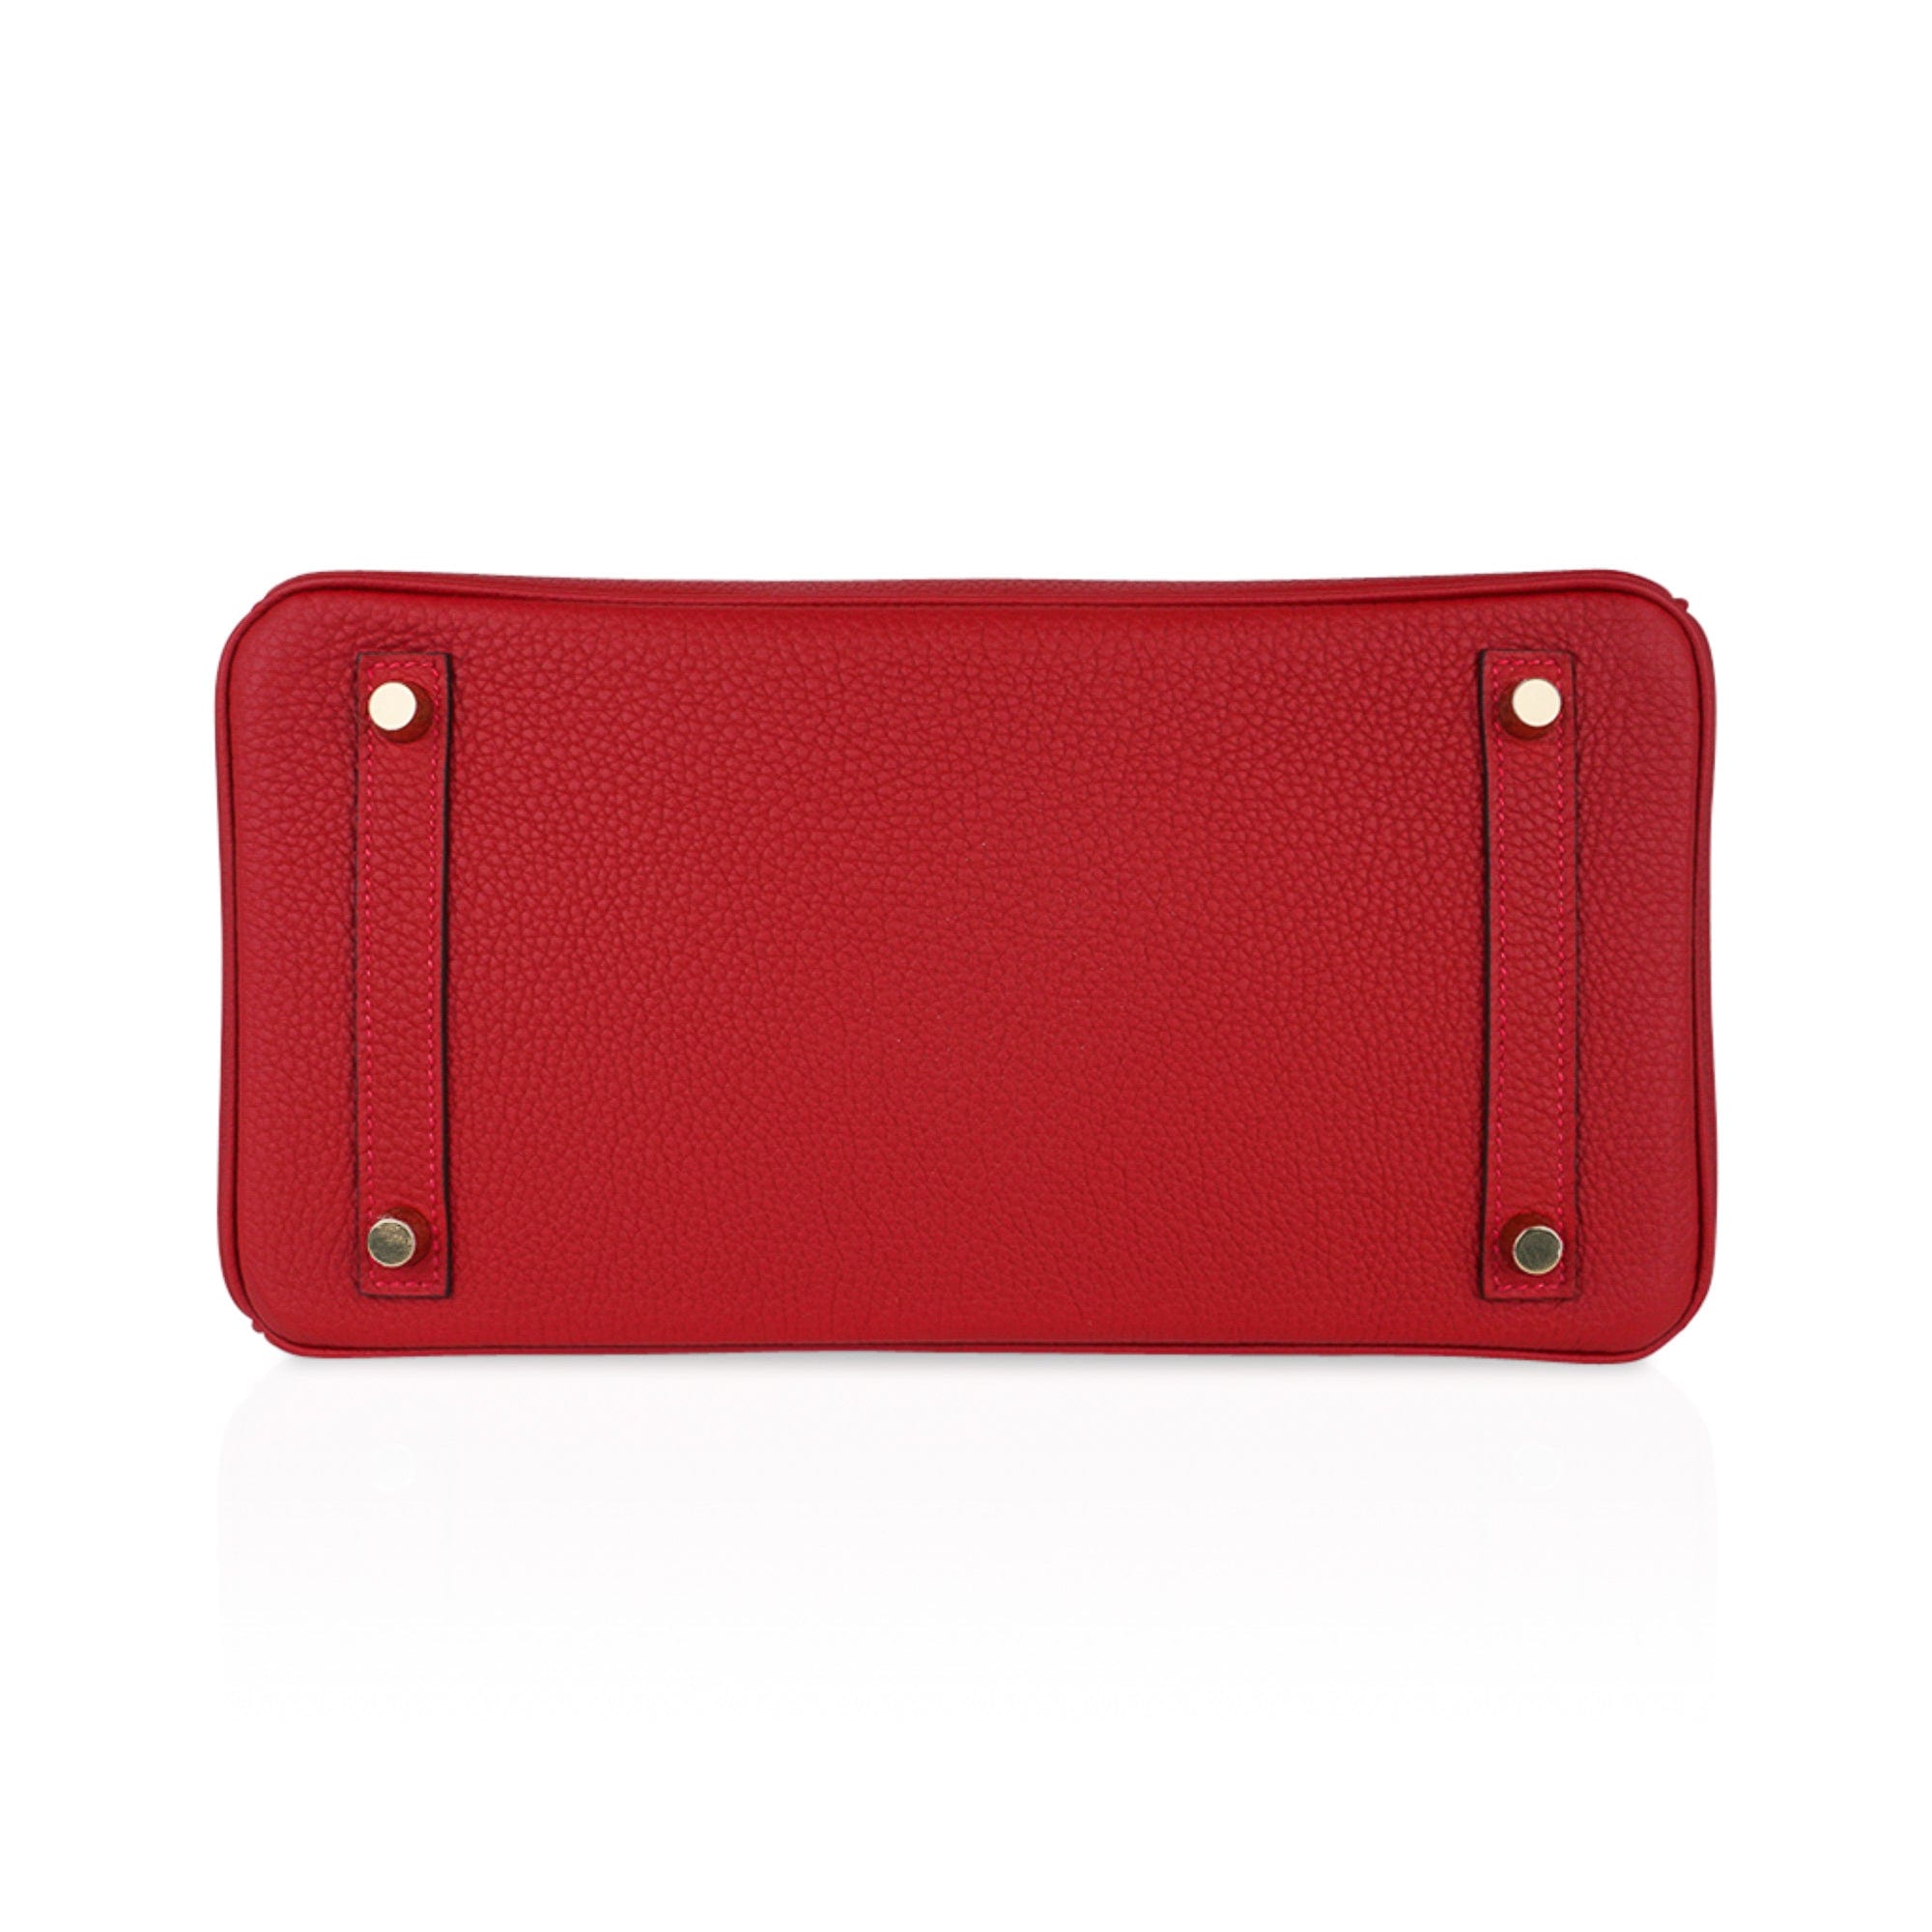 Hermes, Bags, Hermes Lipstick Case Leather Red